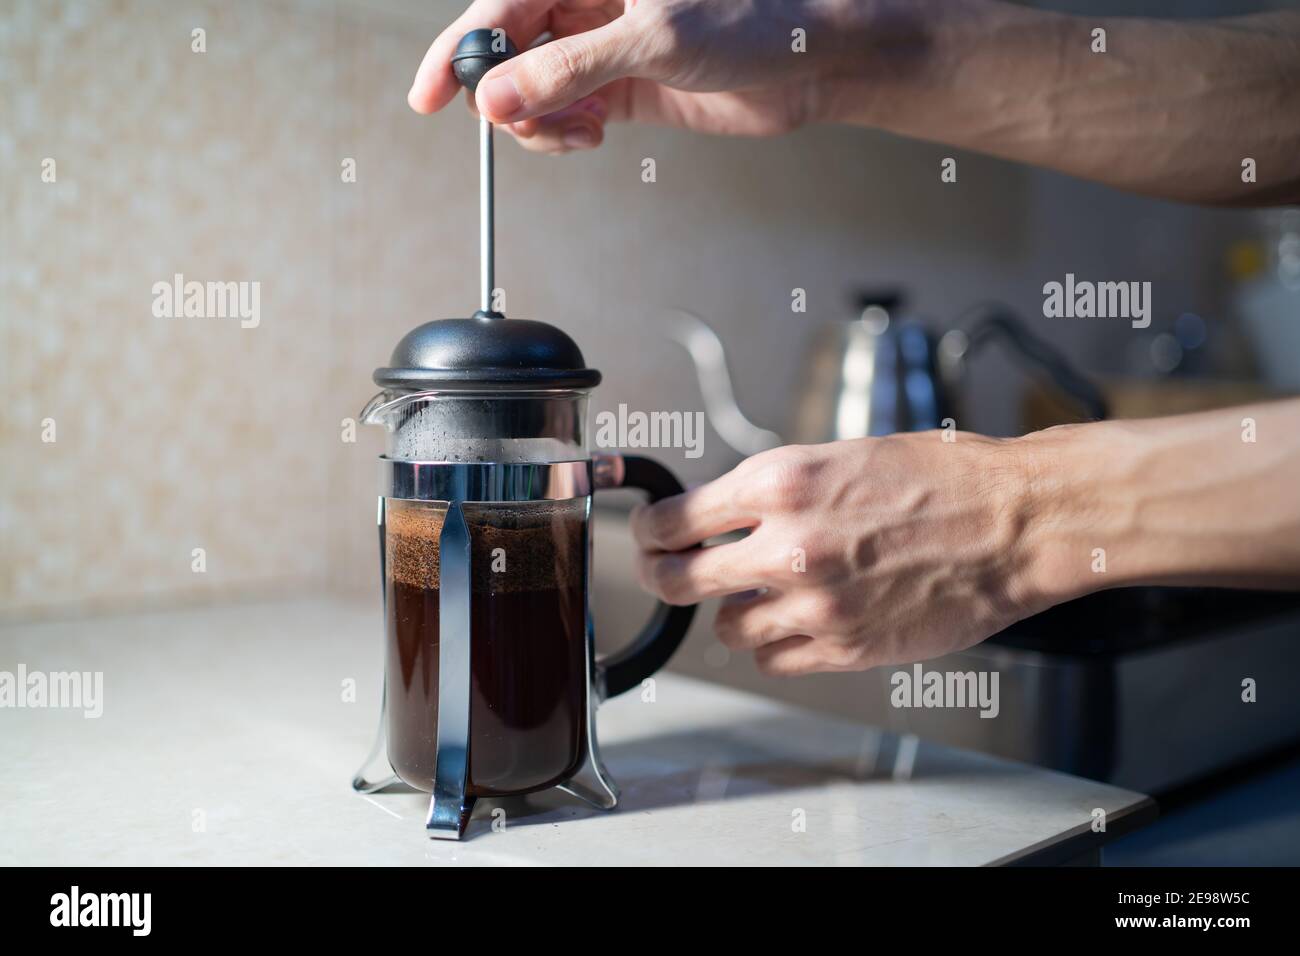 Making French Press coffee in the kitchen Stock Photo